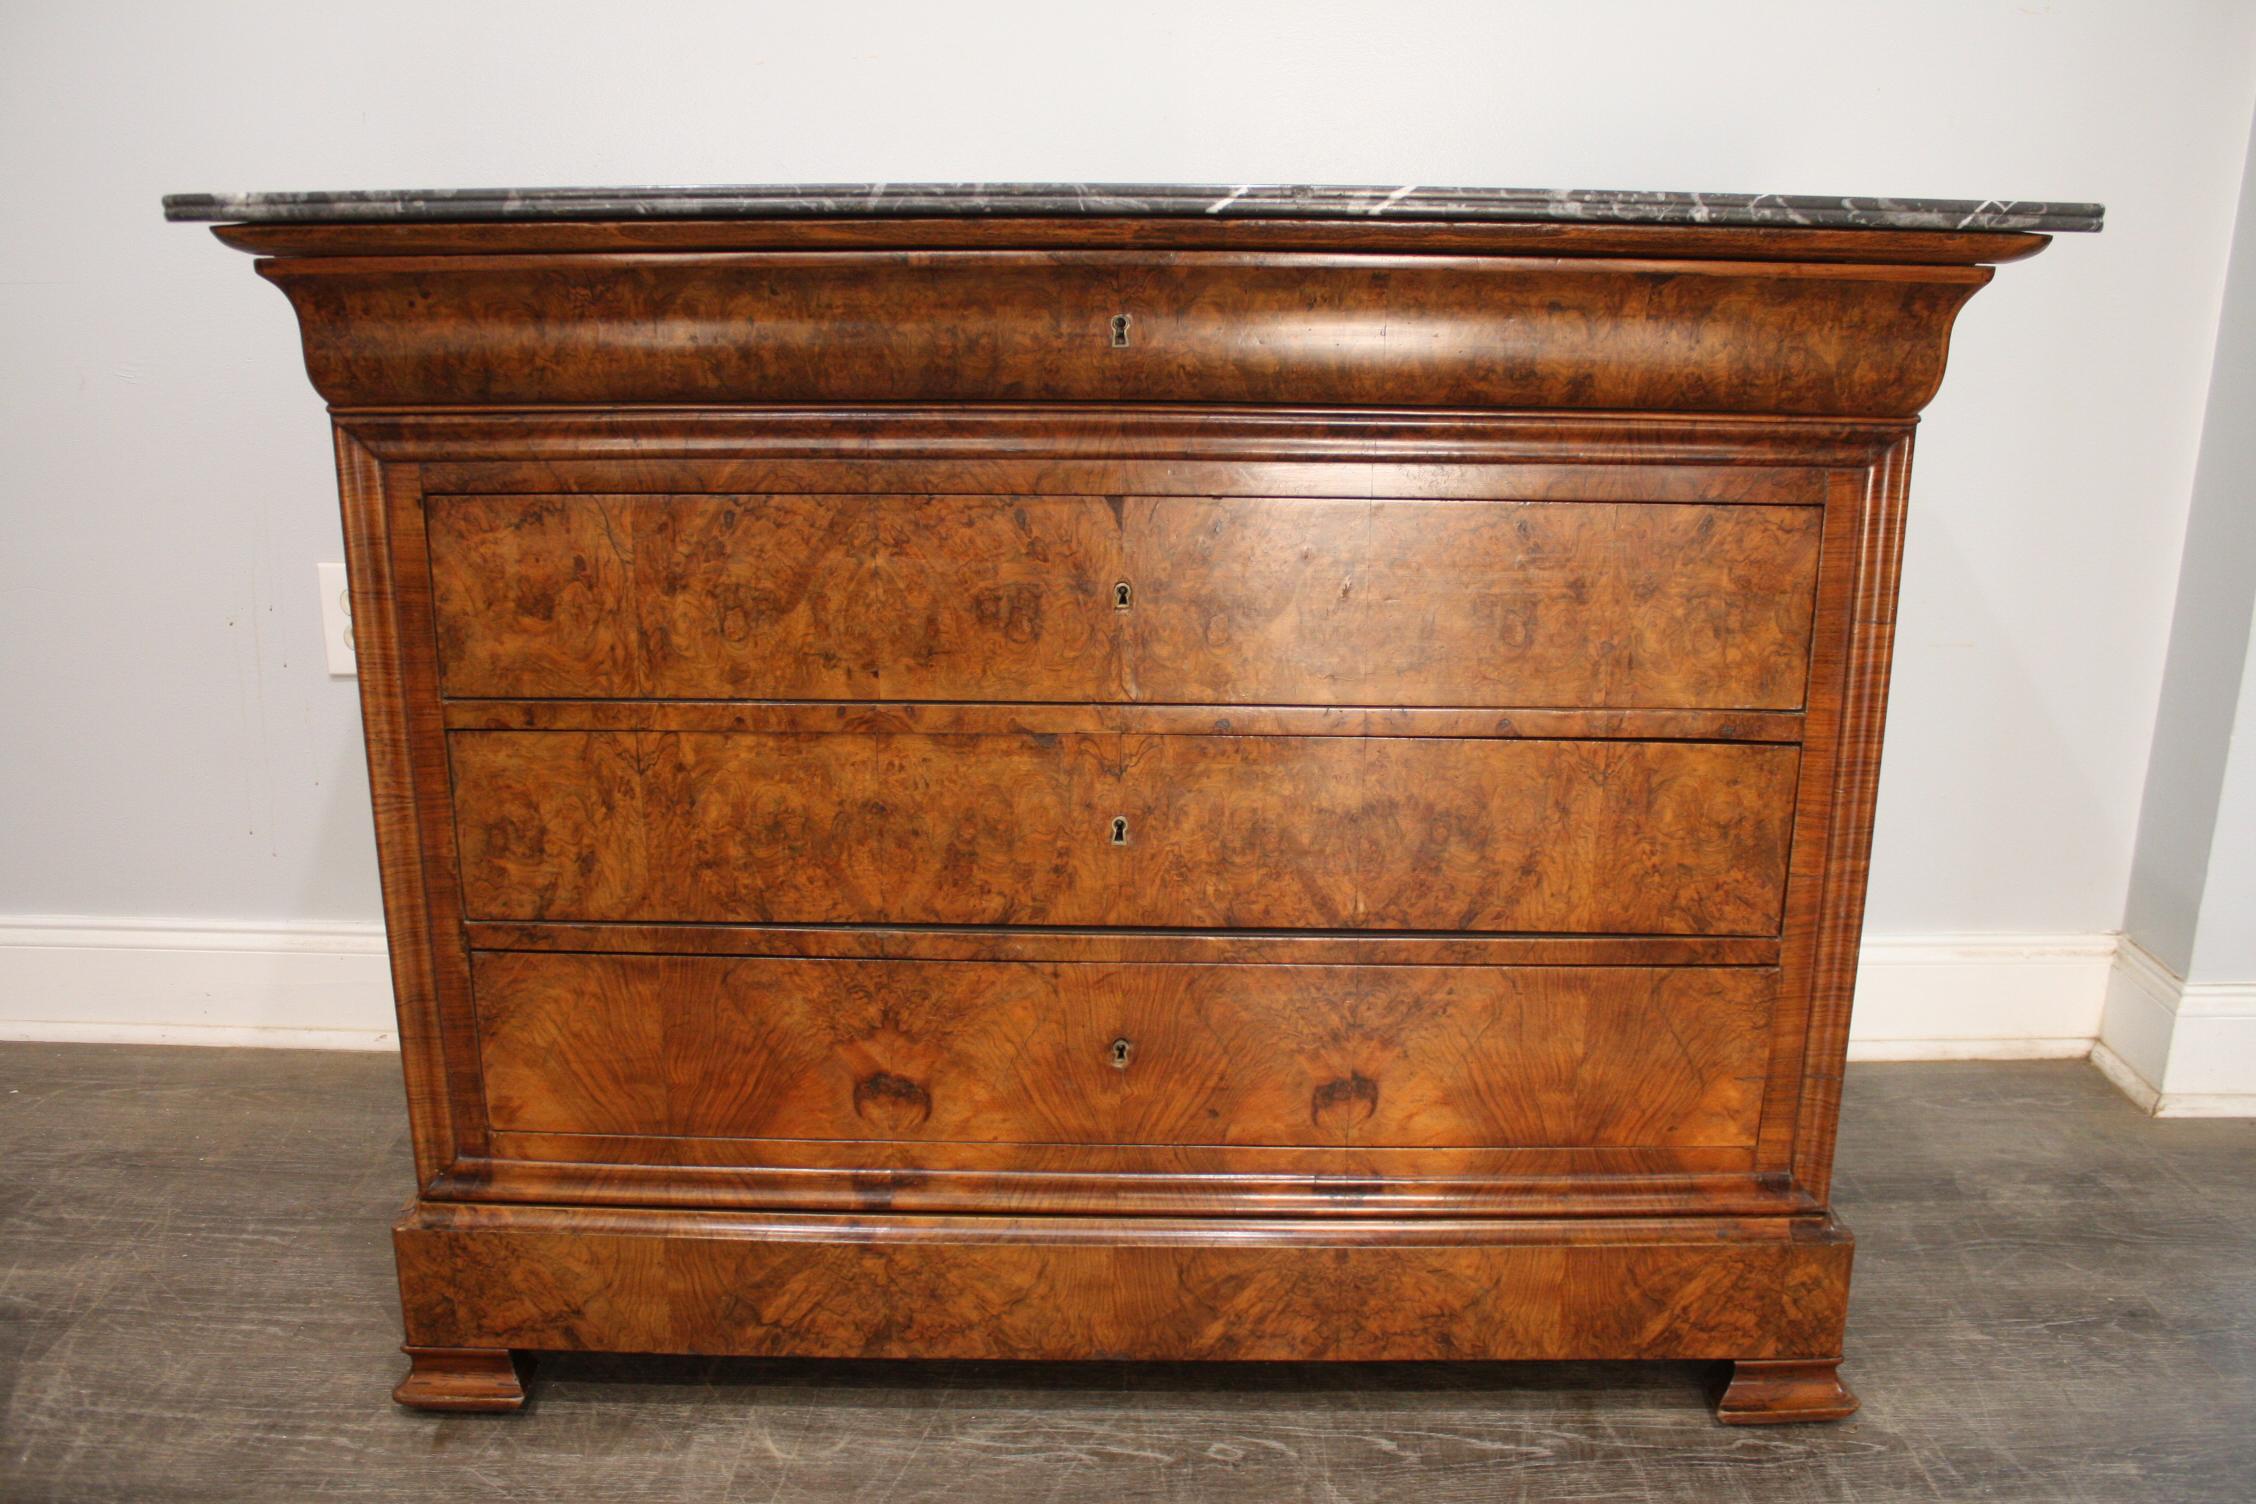 This 19th century French Commode is made of burl of walnut with a Sainte-Anne marble top. Simple and elegant.